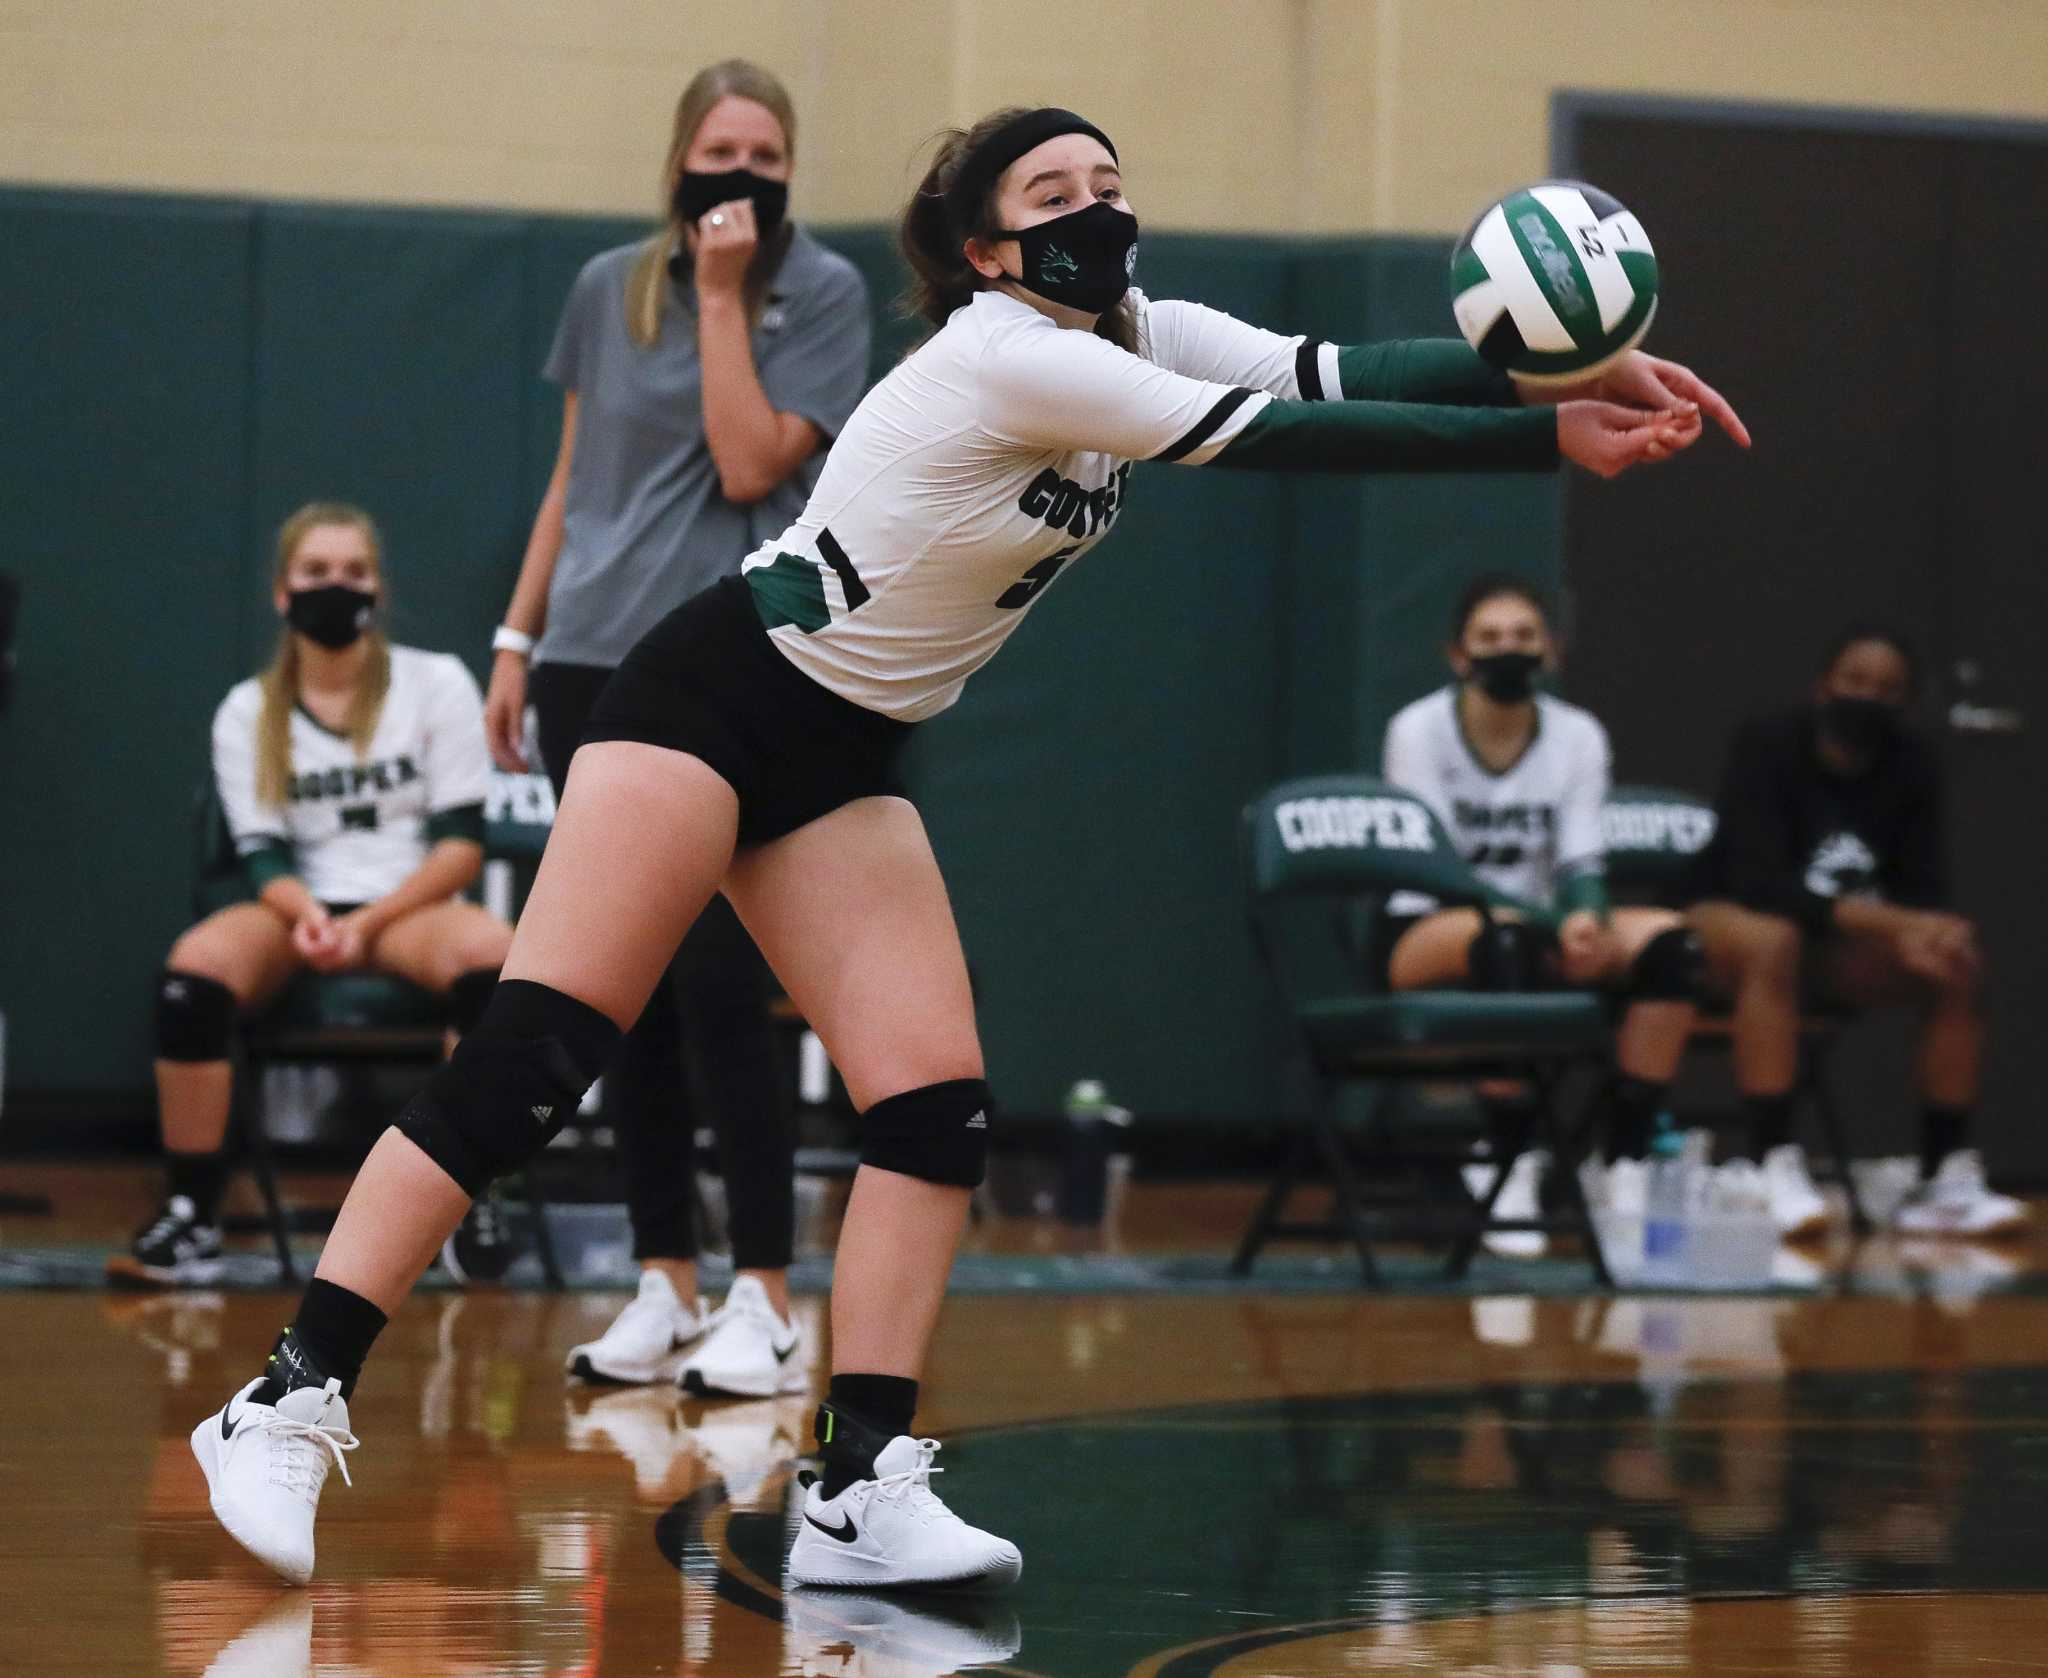 VOLLEYBALL: Cooper rallies in fifth set to beat Conroe